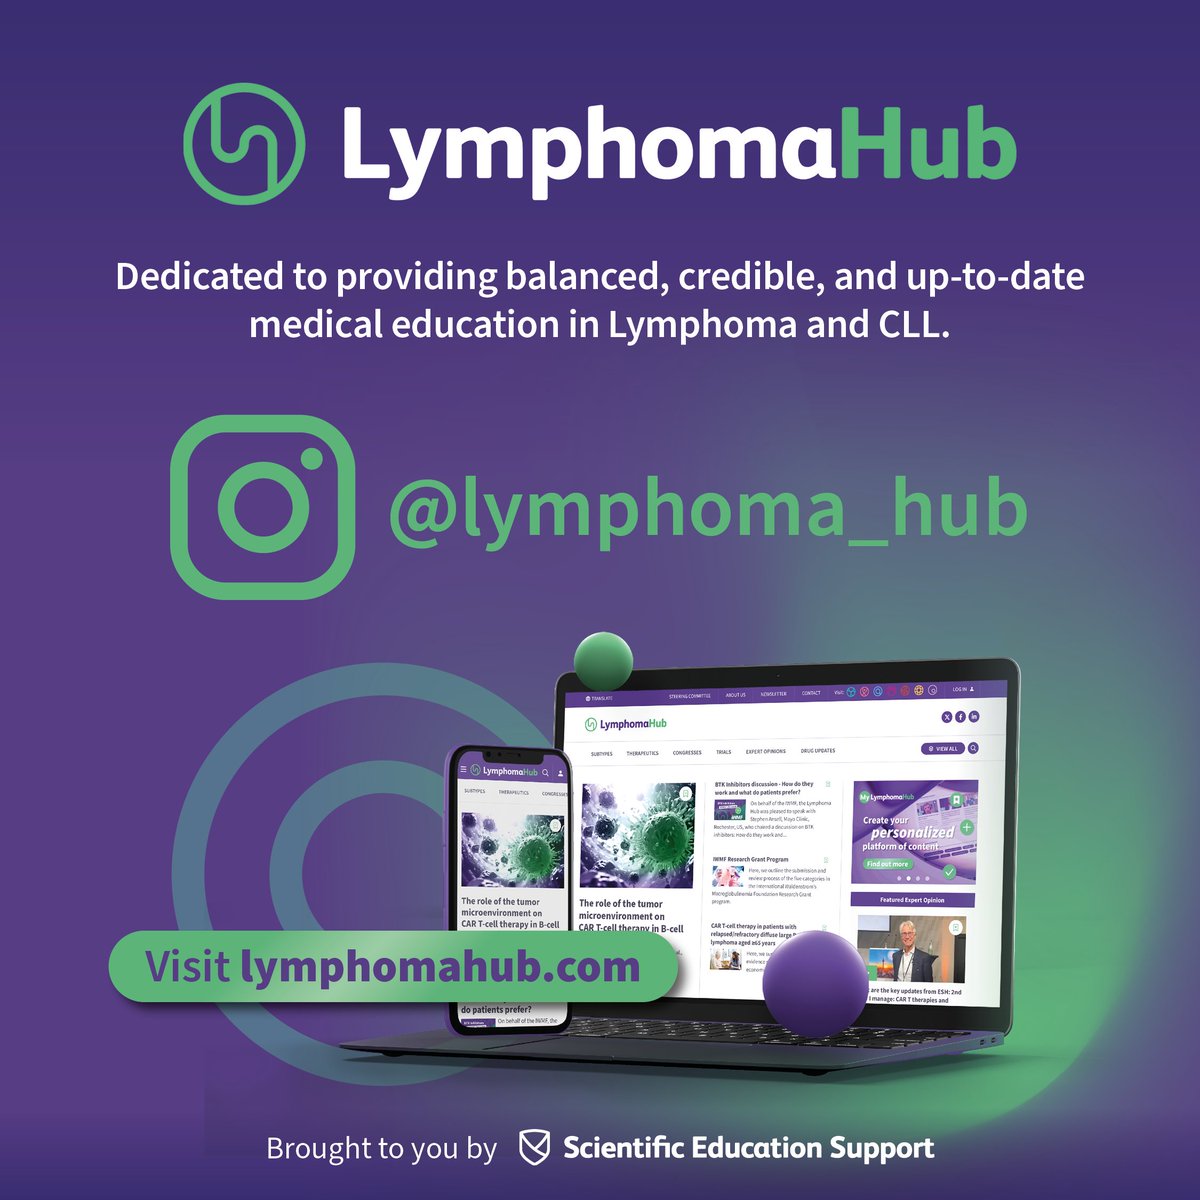 🚨 New account alert! 🚨

We now have an Instagram account: @lymphoma_hub

Follow us and keep an eye out for all the exciting content coming soon!

#lymphoma #lymsm #ChronicLymphocyticLeukemia #MedNews #MedEducation